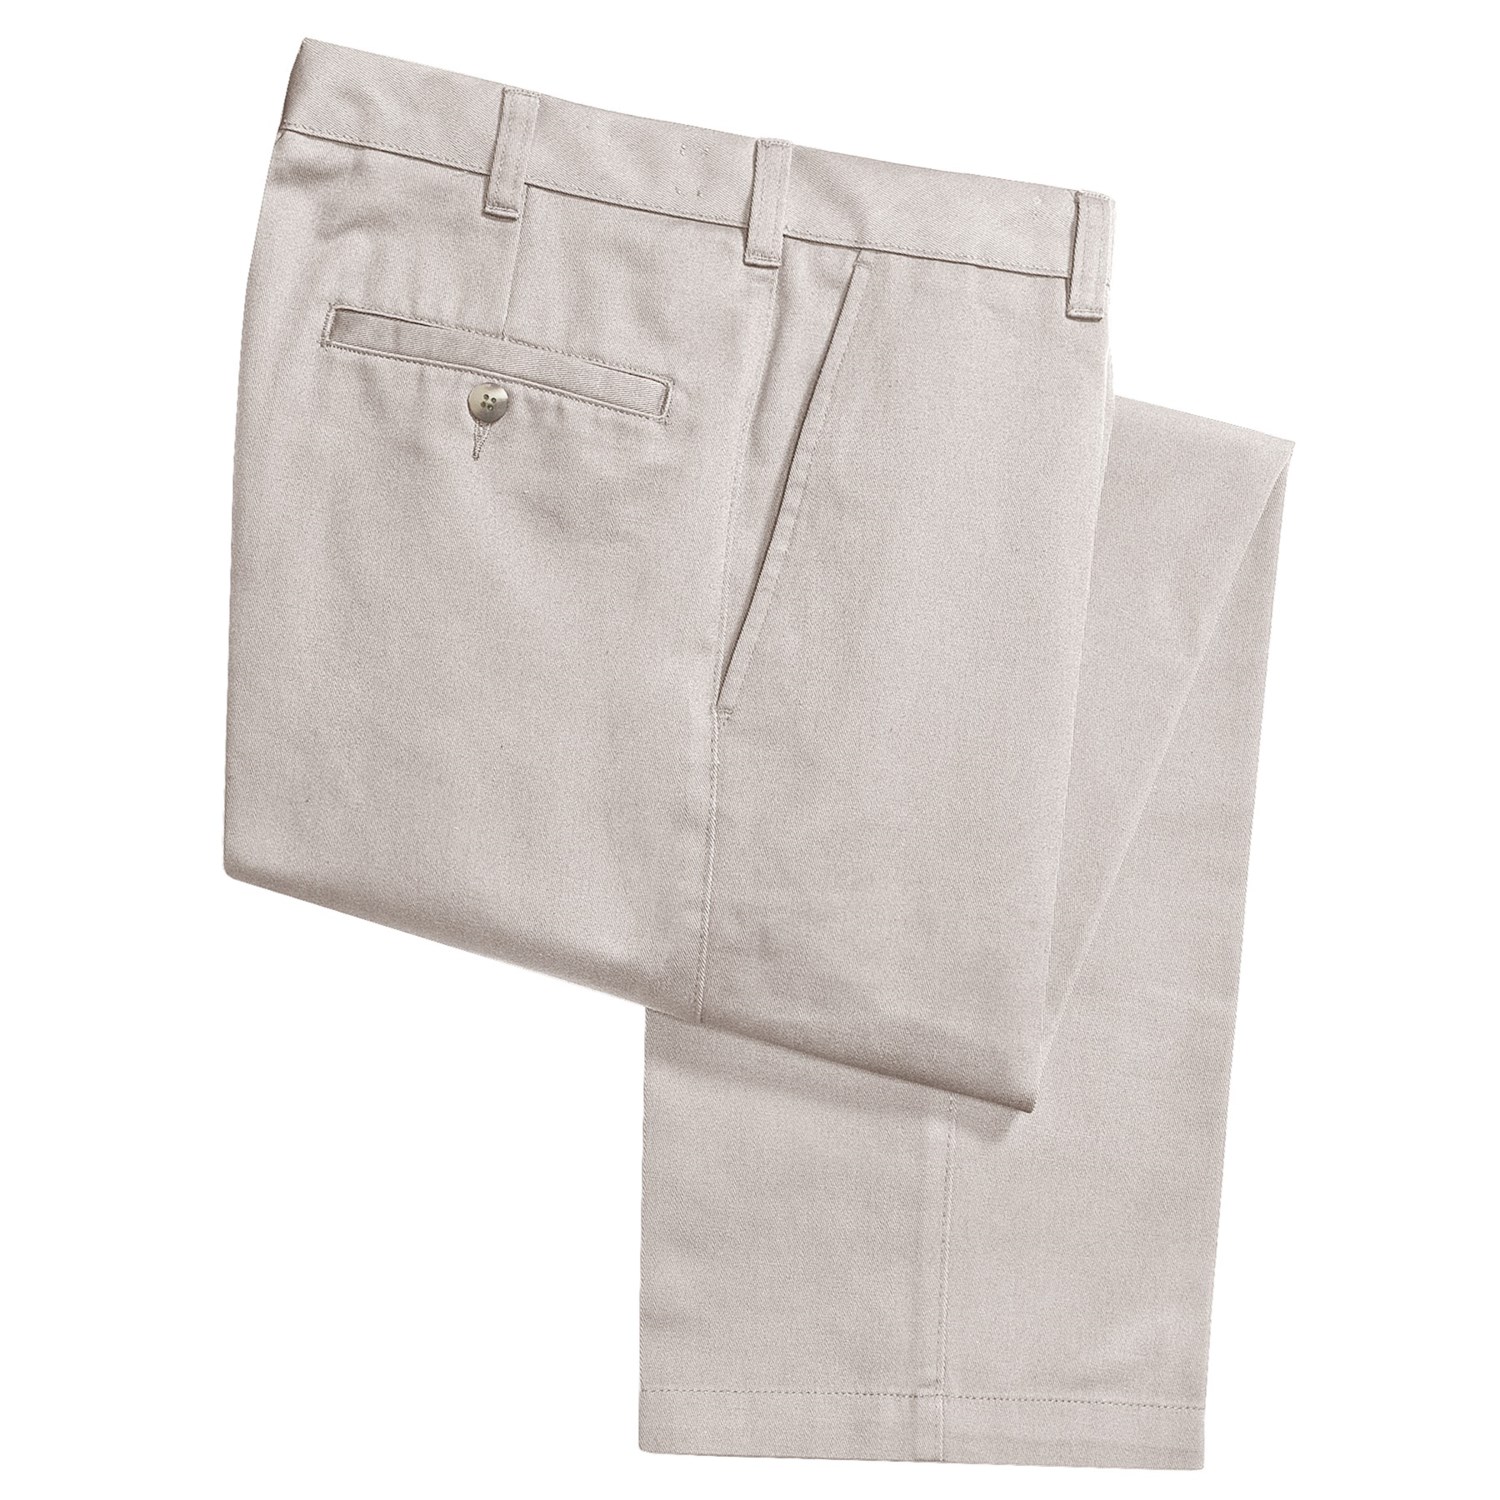 Cotton Twill Pants (For Men) 2154T - Save 99%